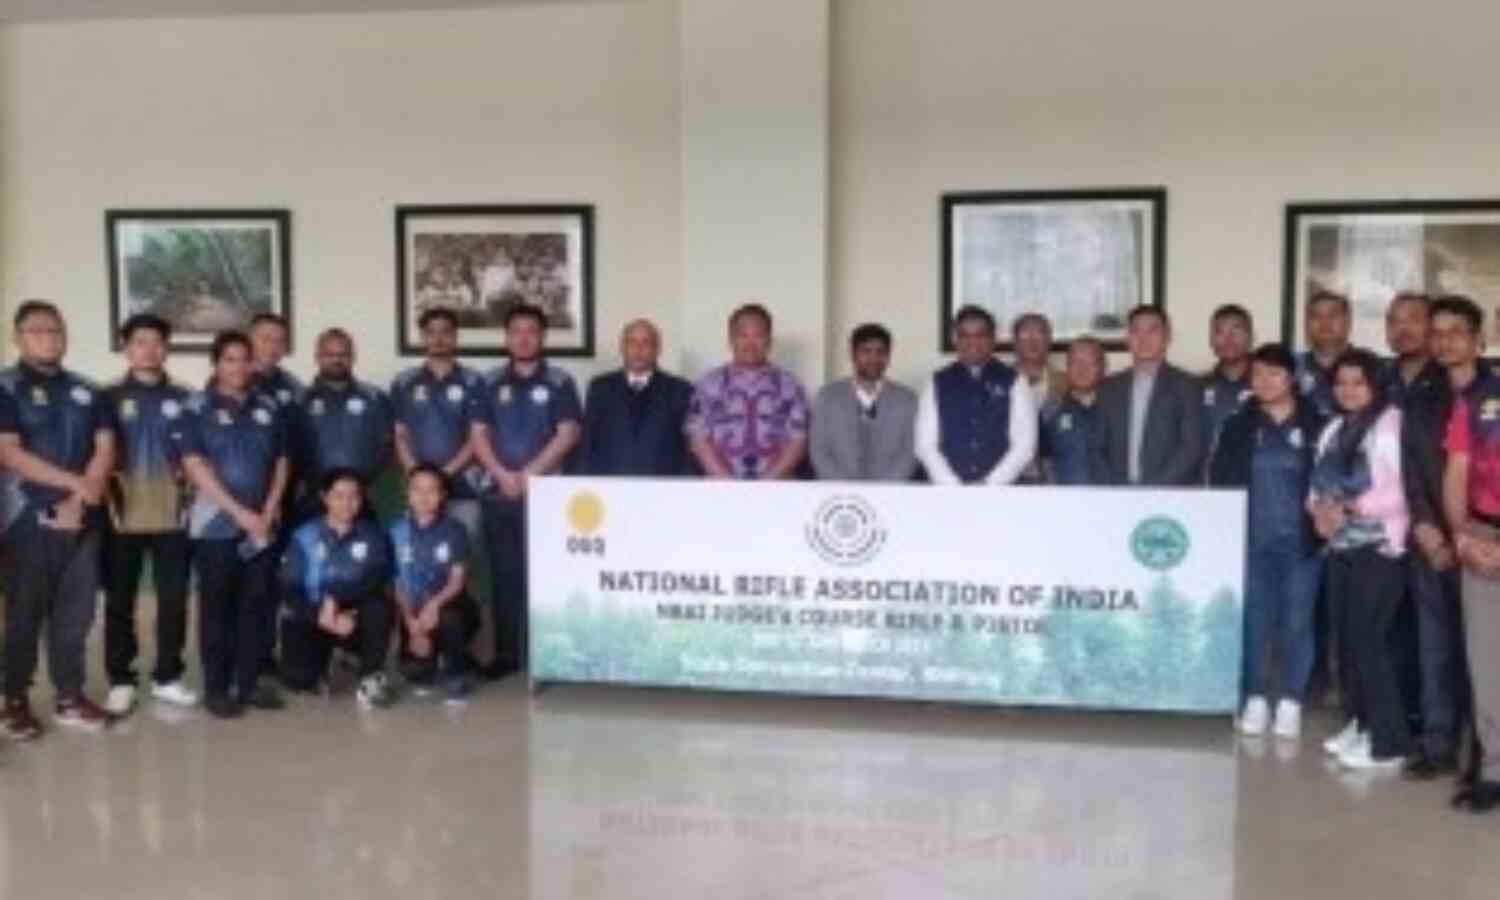 Natl shooting federation conducts first-ever judges course in India